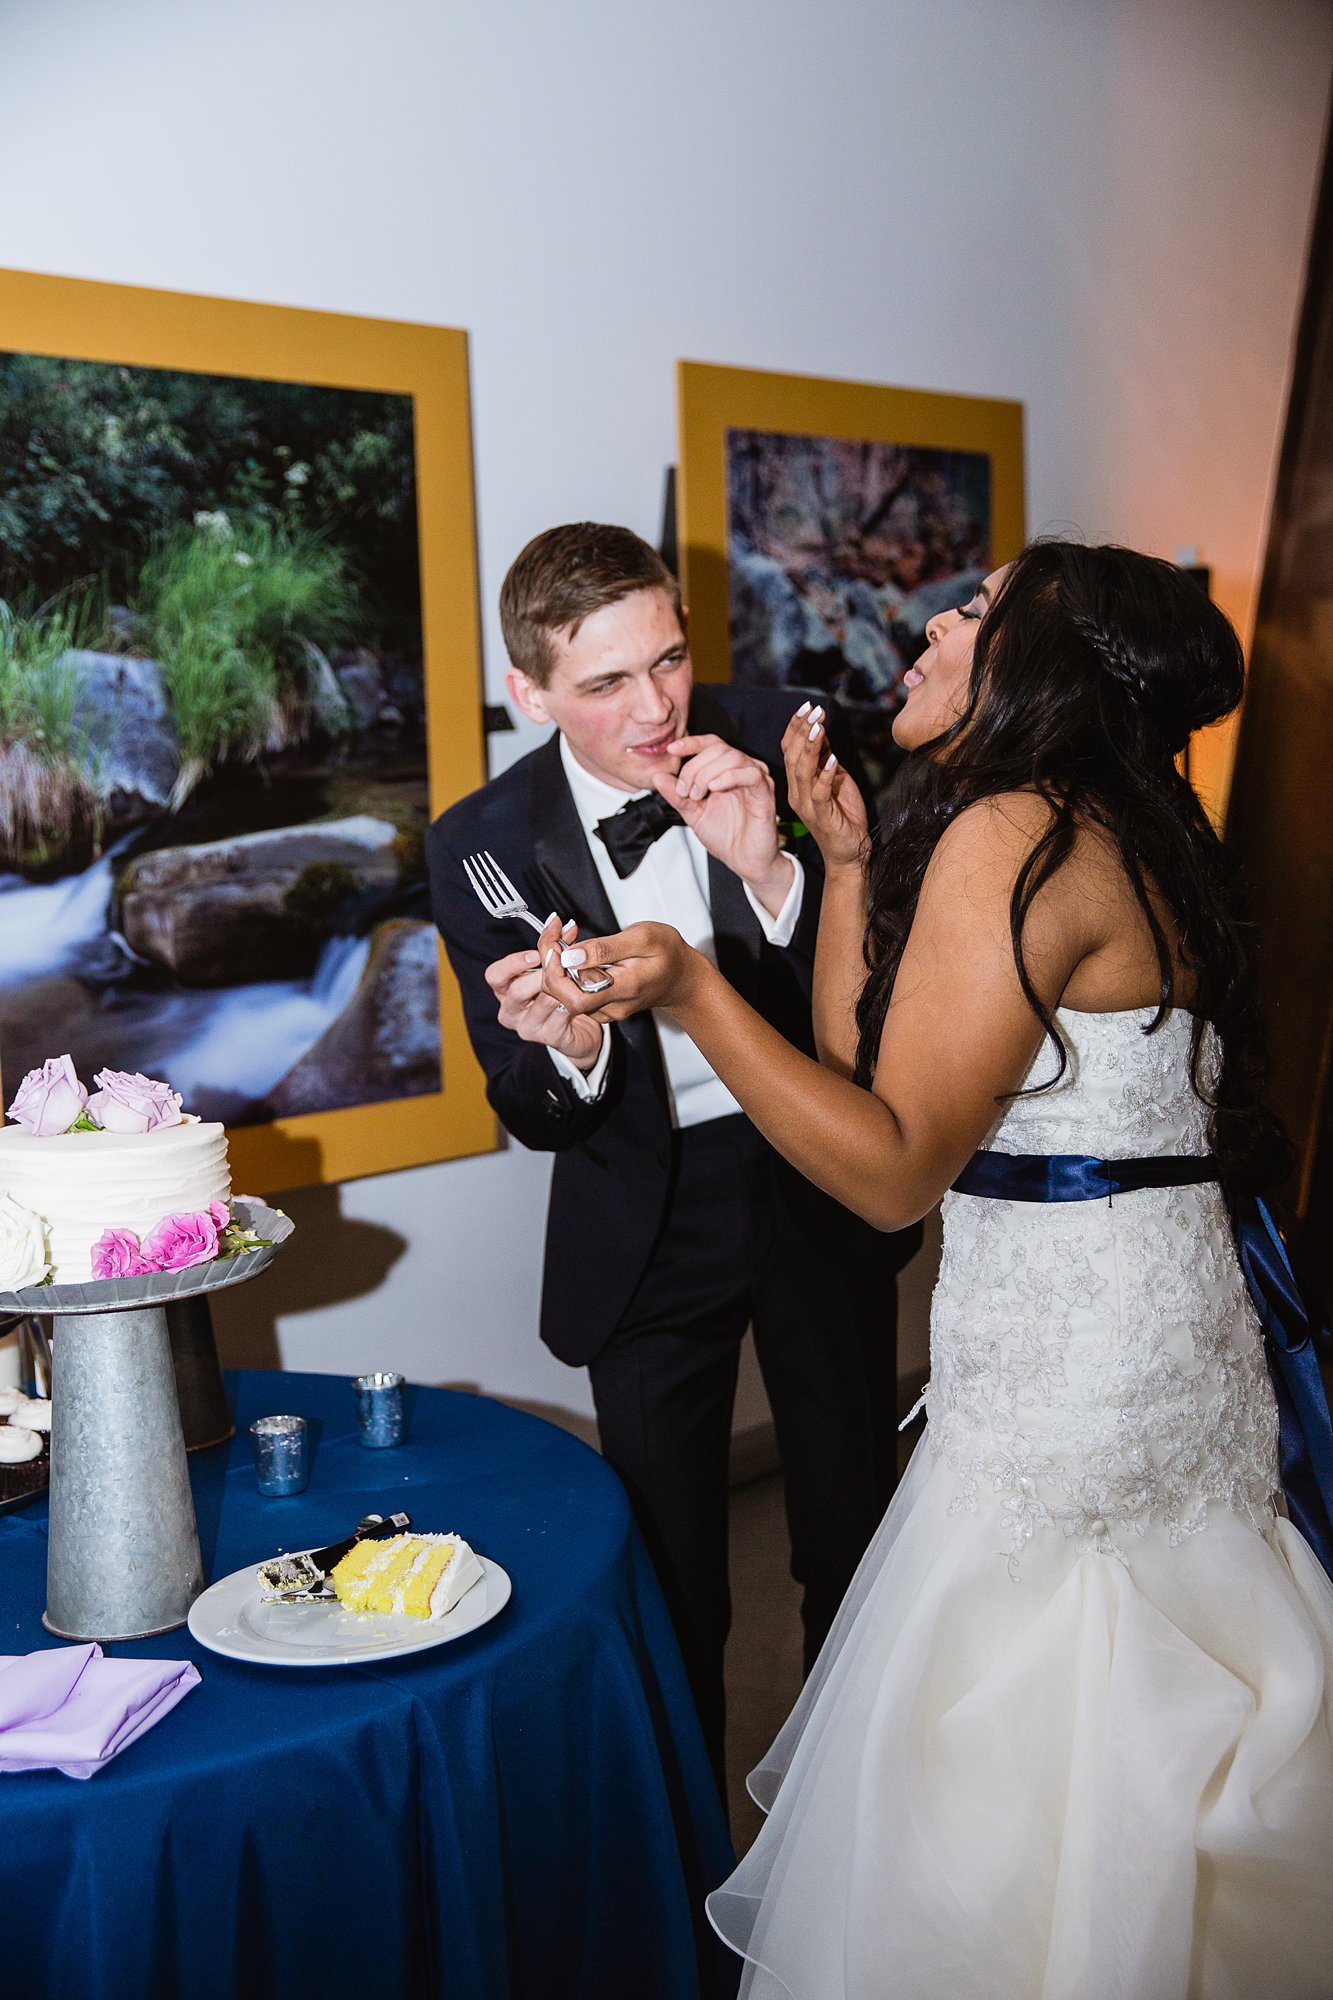 Bride and groom laughing after feeding each other cake at their reception at the Rio Salado Audubon center by Phoenix wedding photographer PMA Photography.